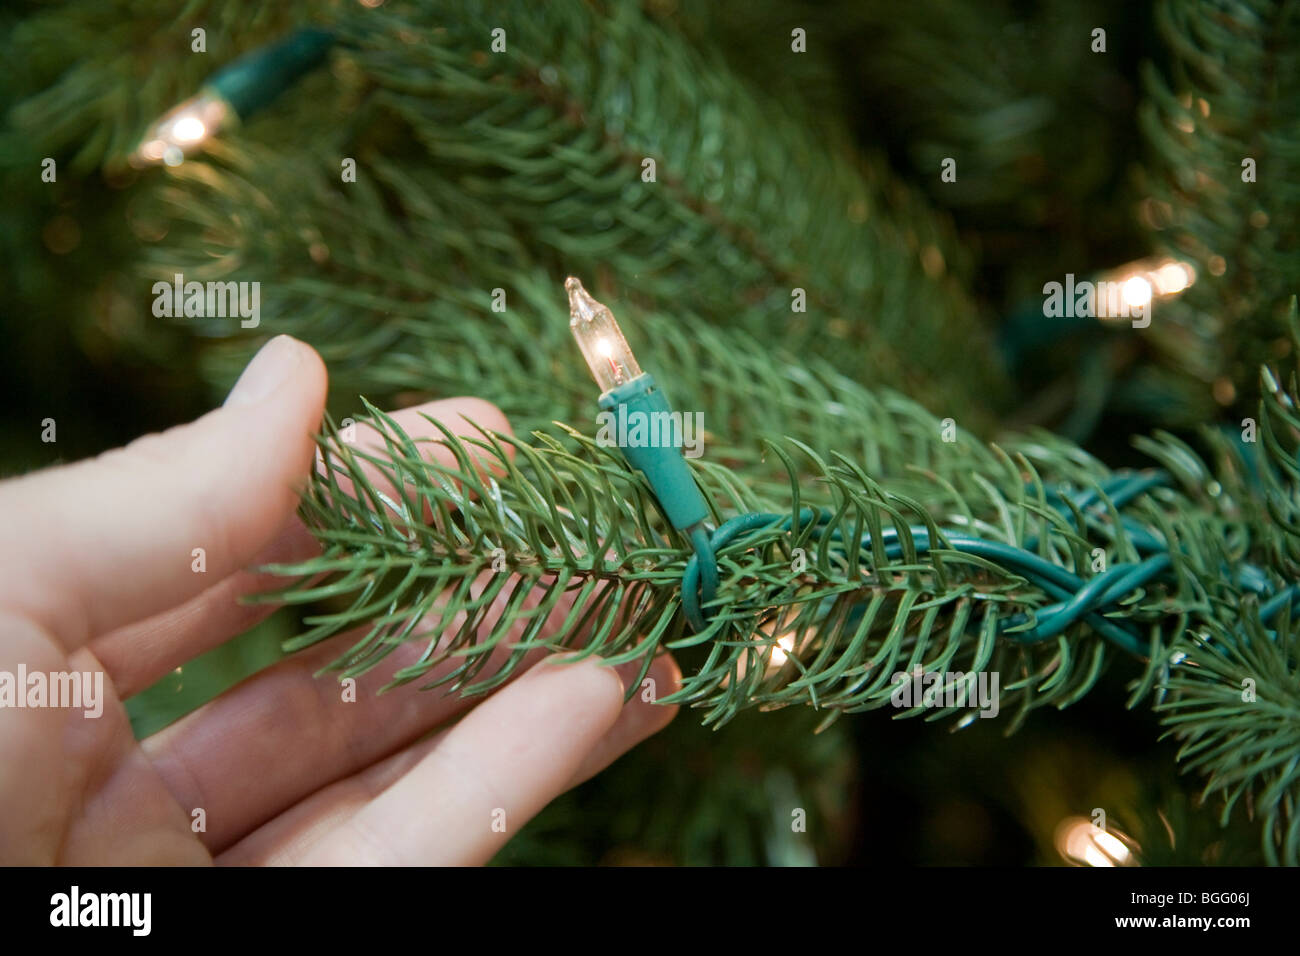 Close Up of hand holding holiday lights on artificial Christmas tree. Stock Photo